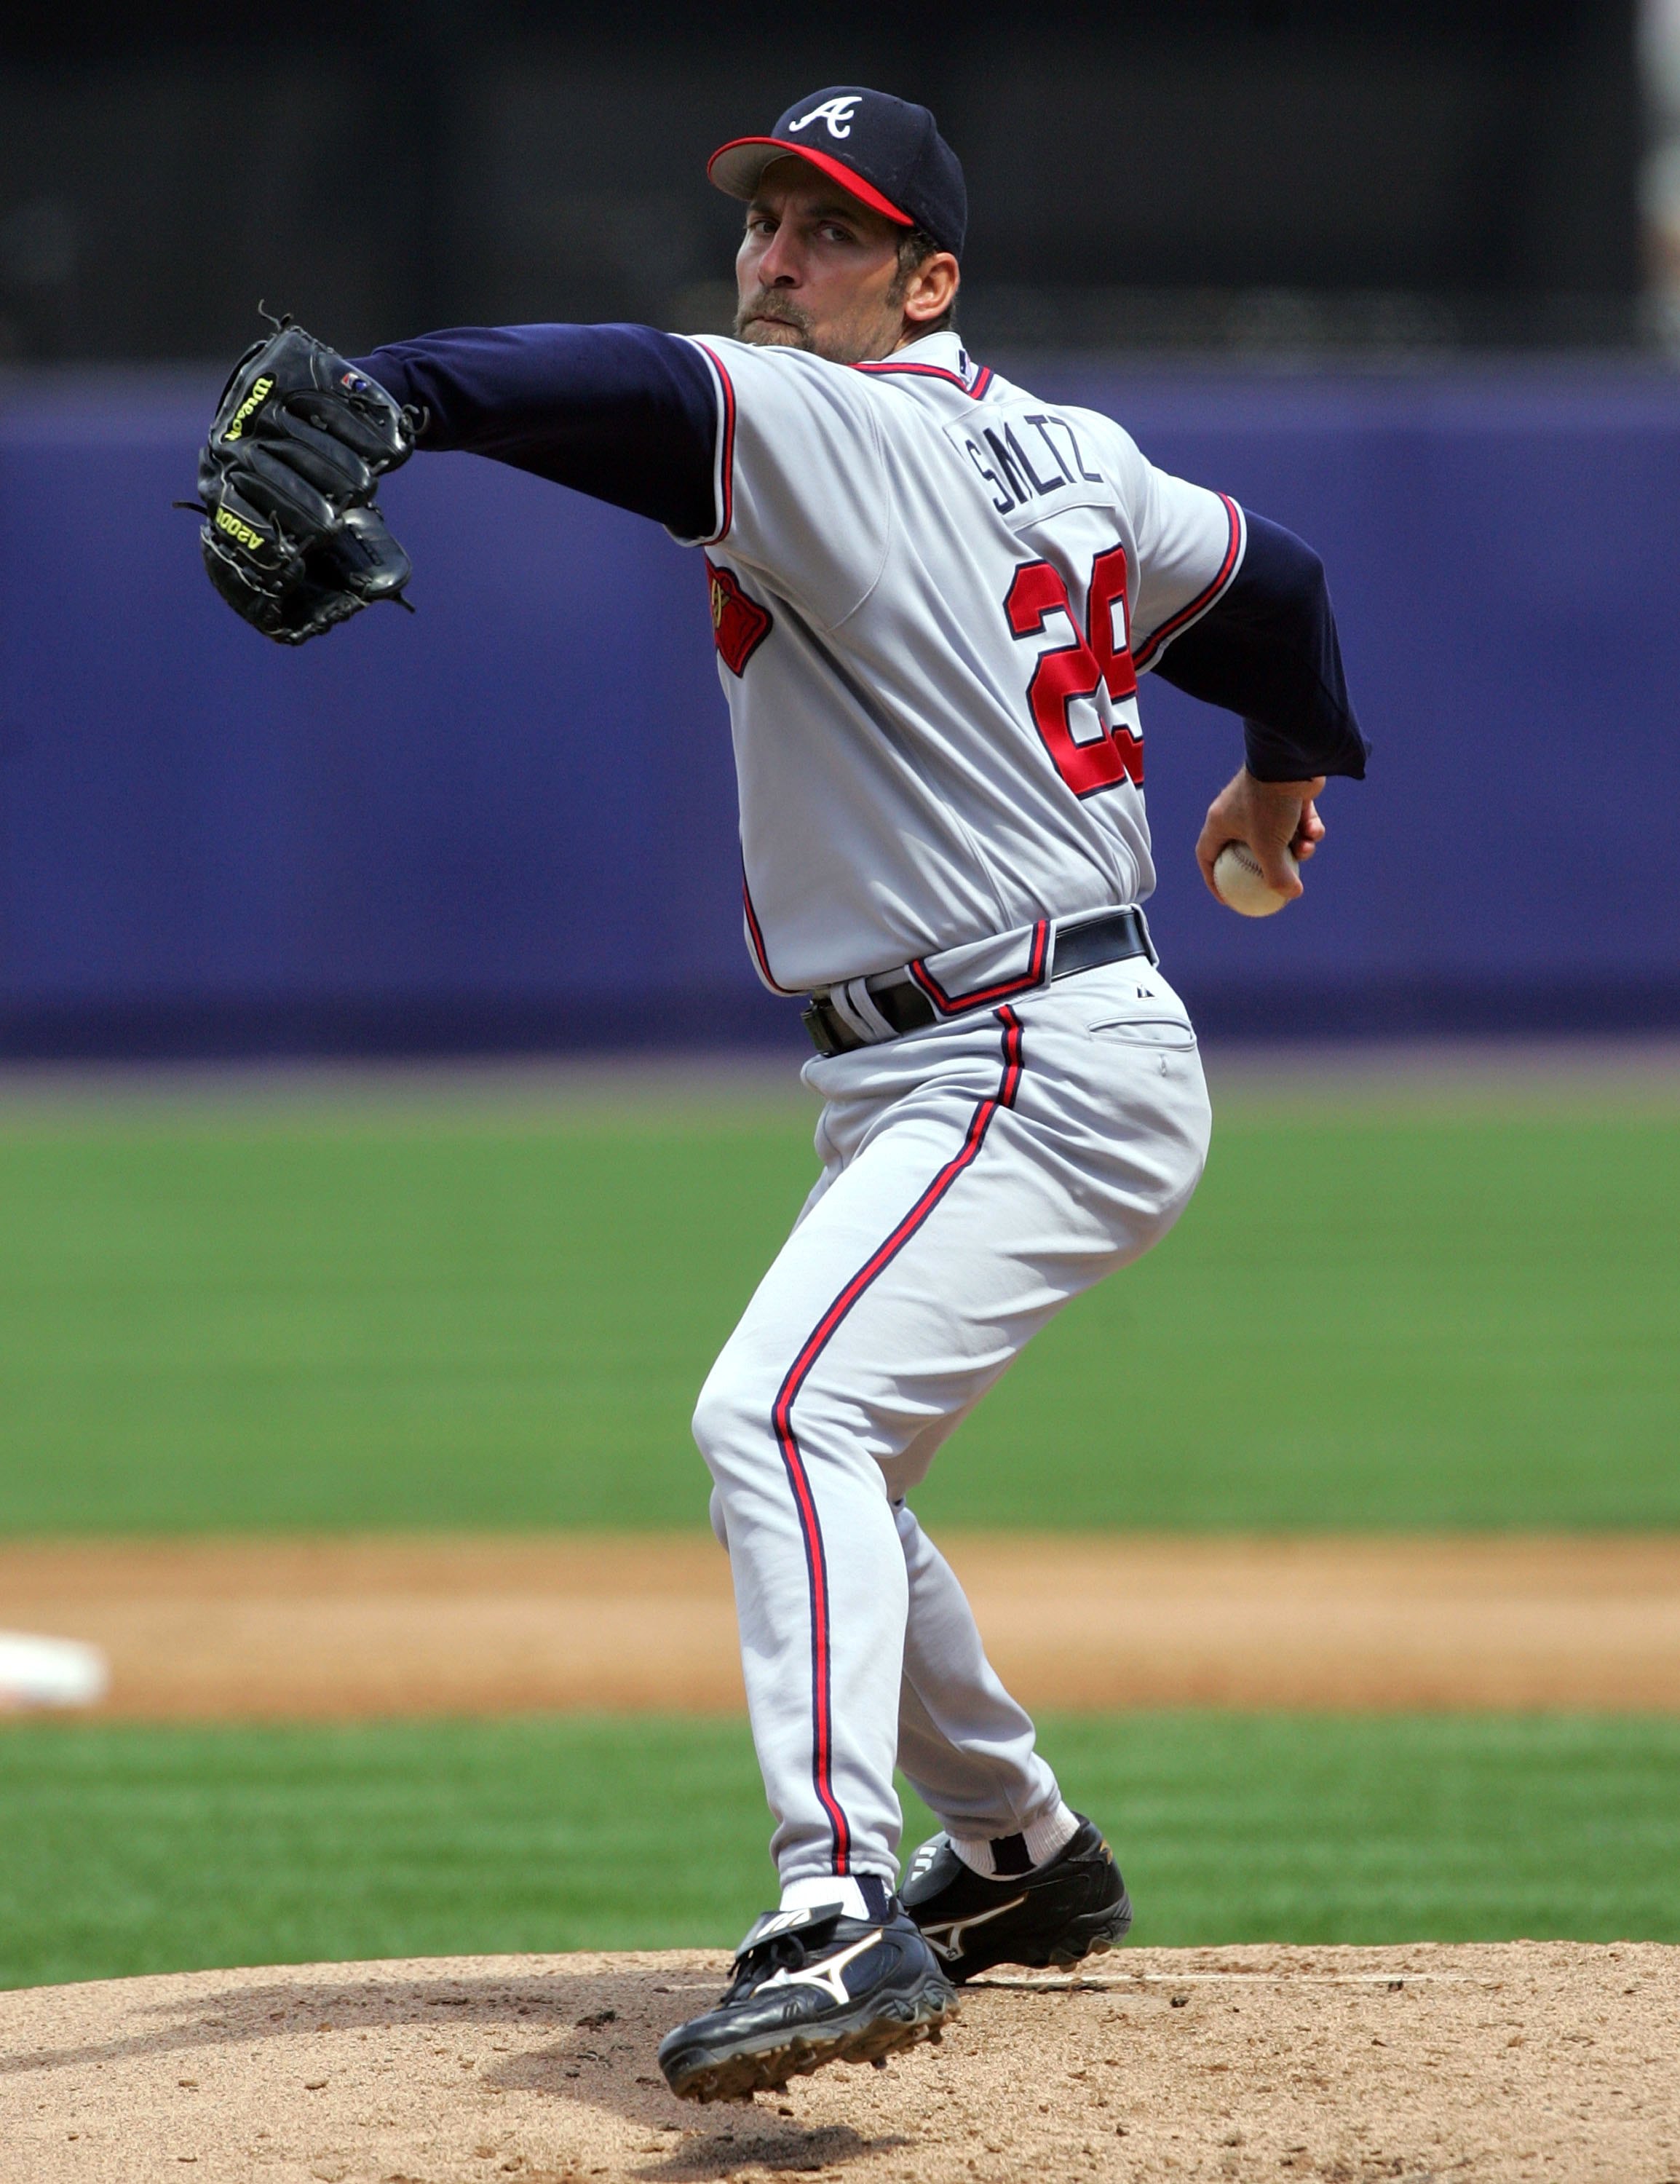 NEW YORK - MAY 07:  John Smoltz #29 of the Atlanta Braves delivers a pitch against the New York Mets on May 7, 2006 at Shea Stadium in the Flushing neighborhood of the Queens borough of New York City.  (Photo by Jim McIsaac/Getty Images)